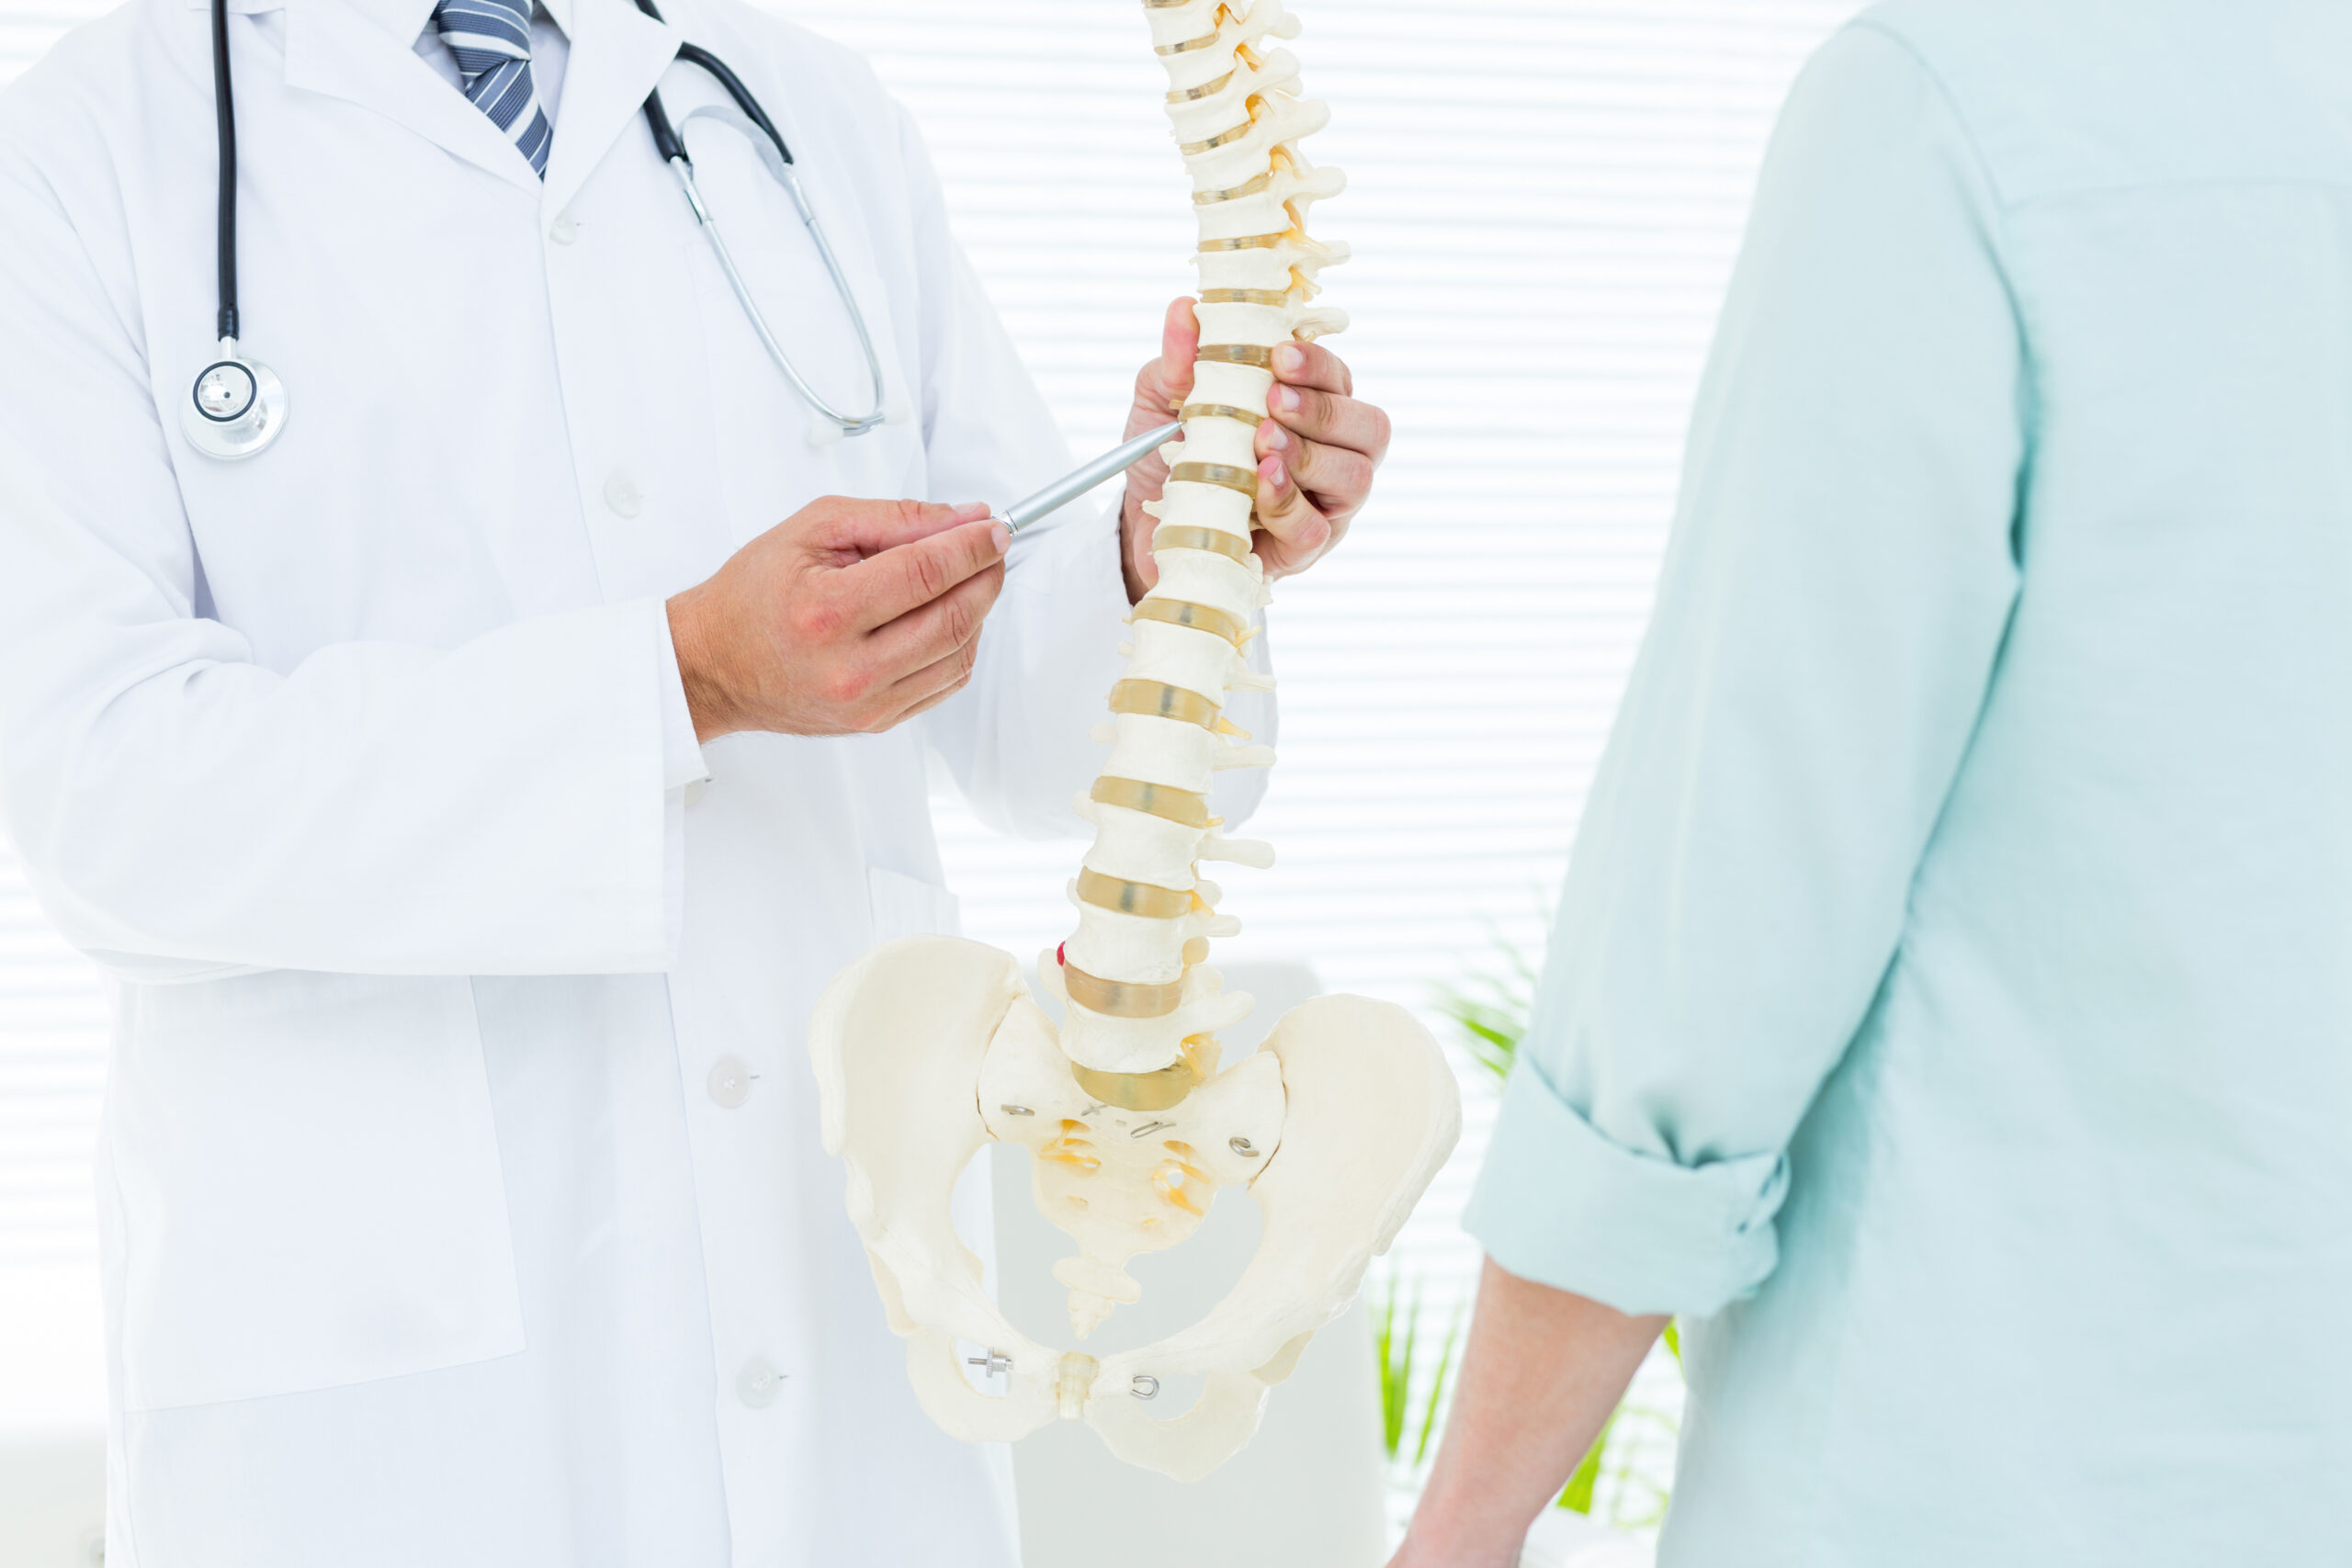 A spine doctor discussing back pain relief options with a patient, using a model of the human spine.